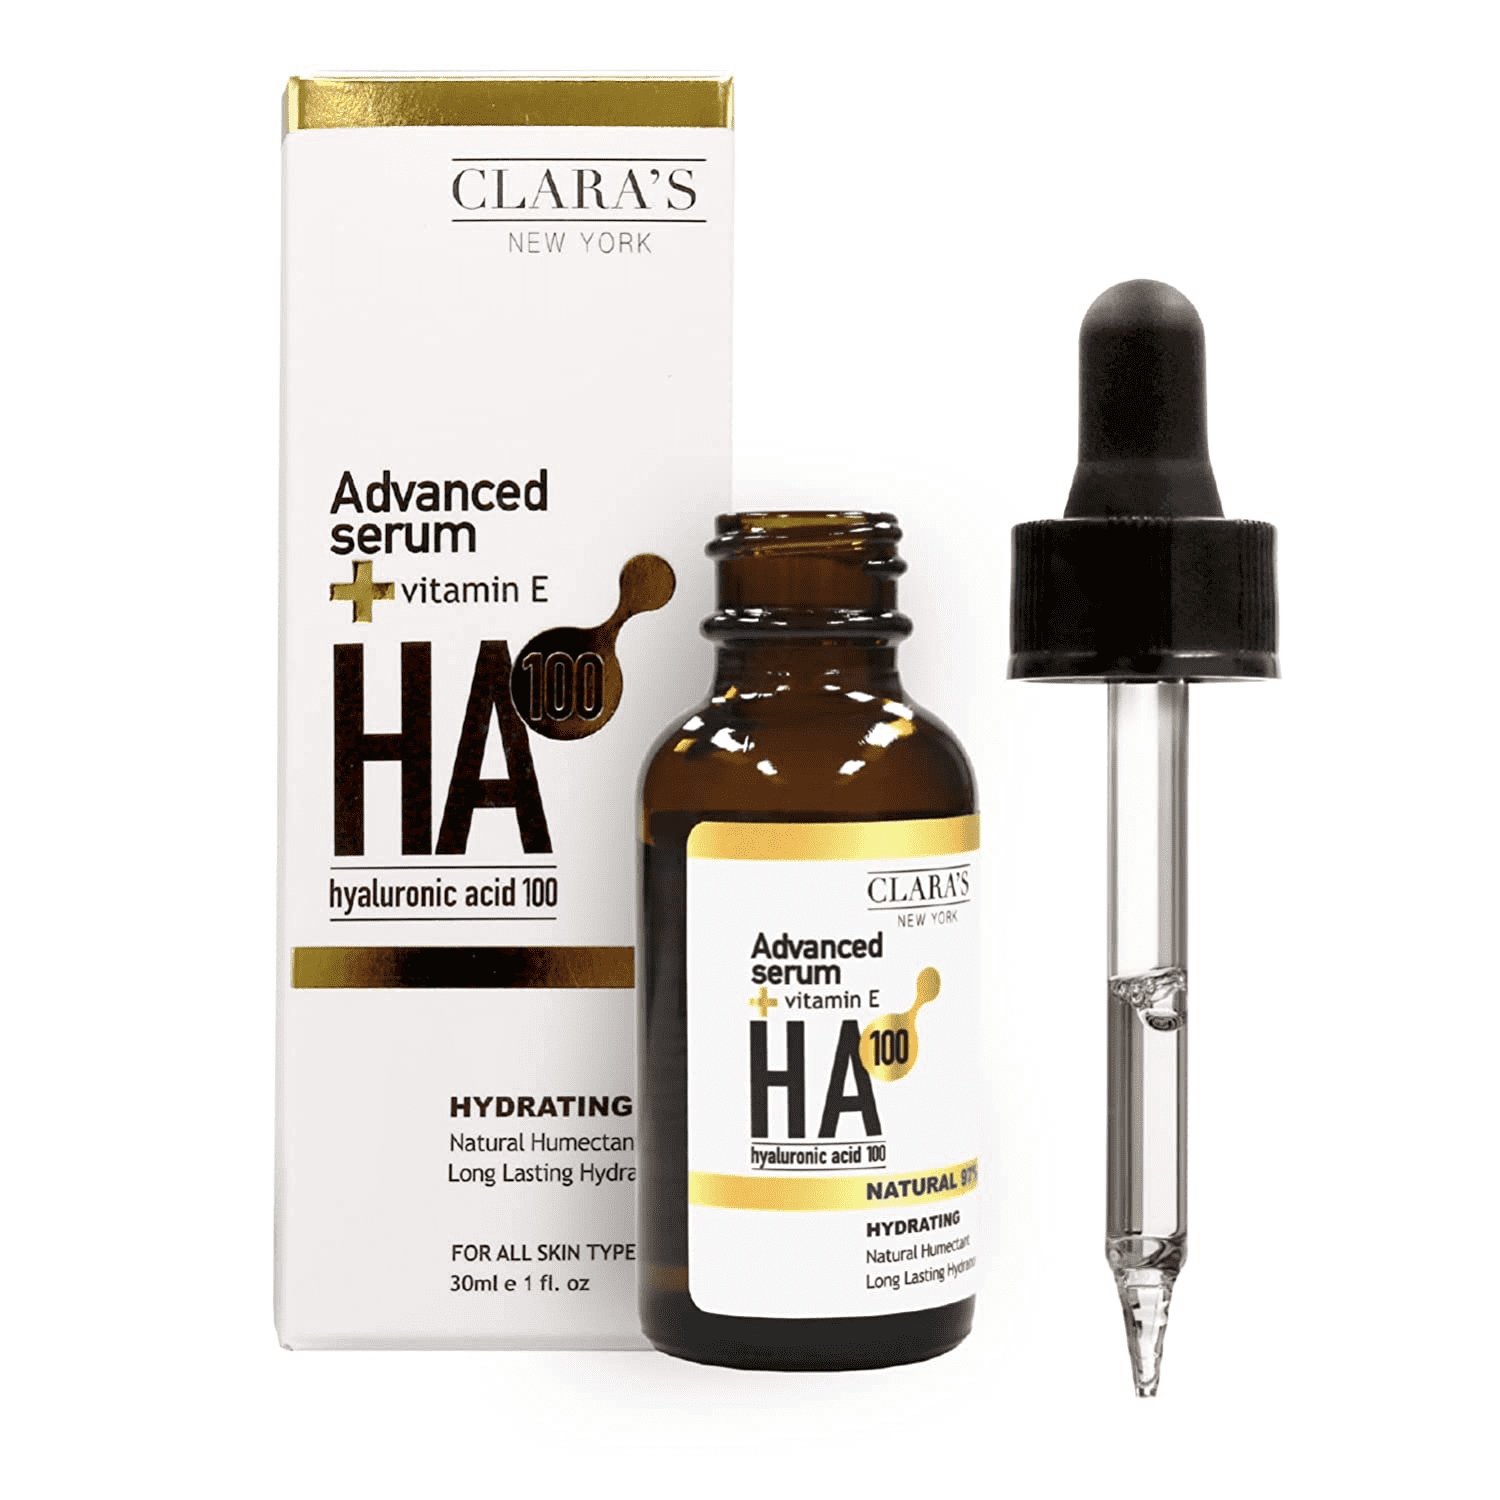 CLARA'S NEW YORK Advanced Hyaluronic Acid Facial Serum 30ml with Vitamin E  for Lasting Hydration and Moisturized Skin - Made in USA 